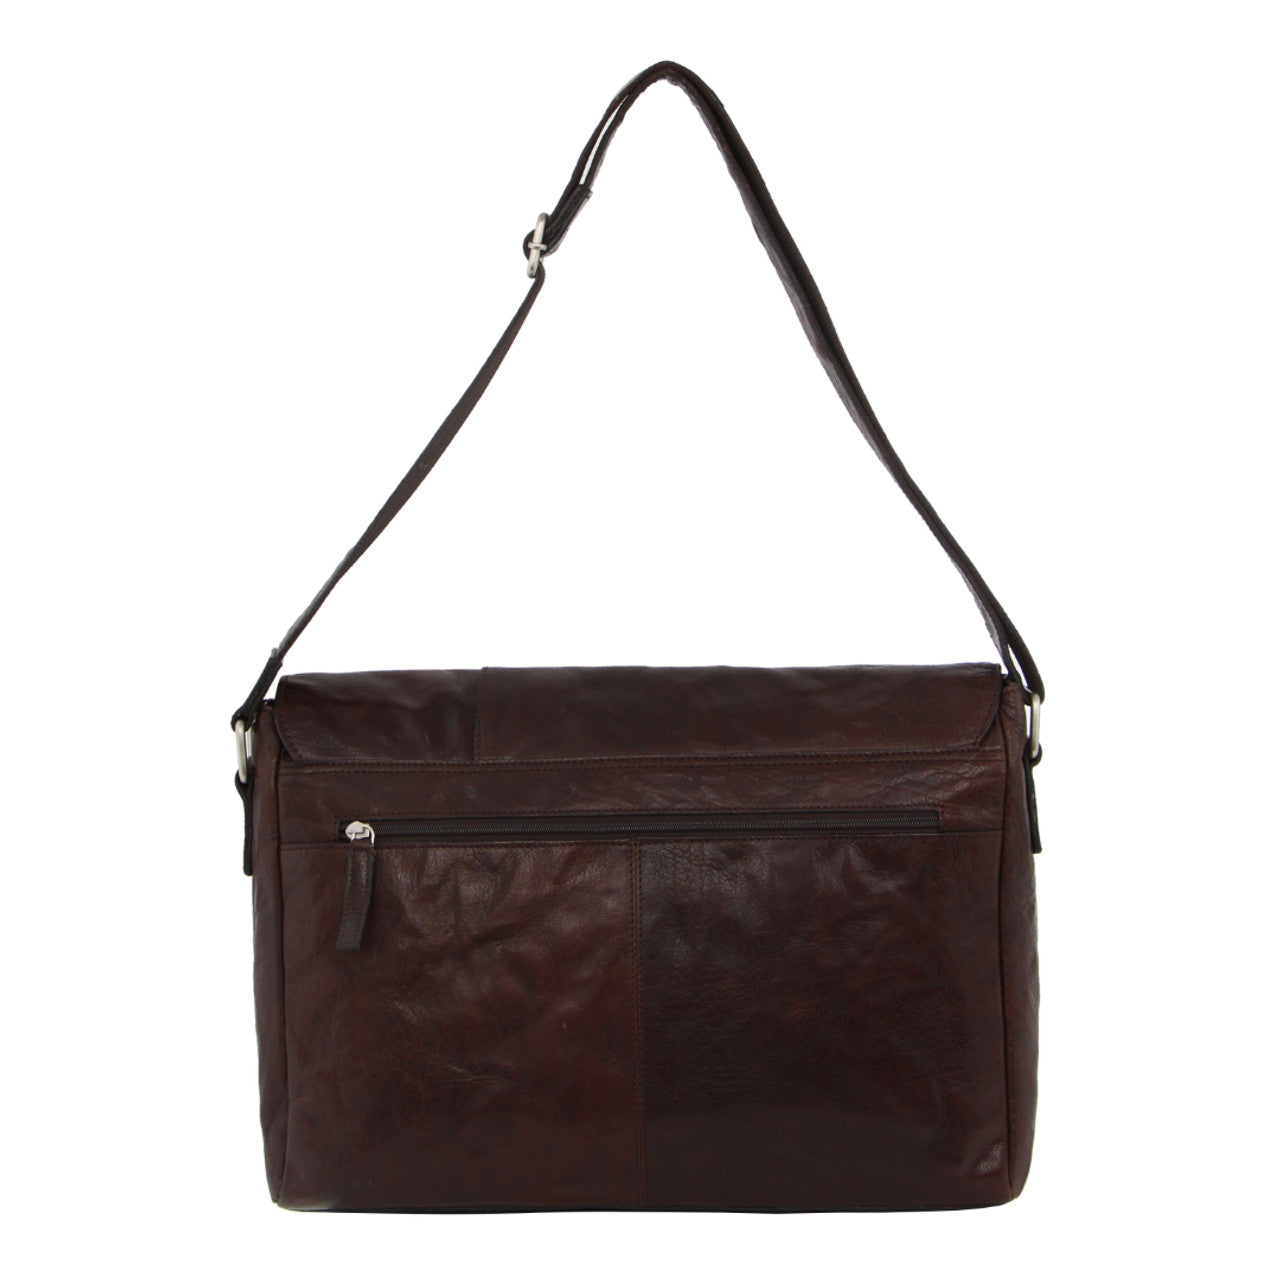 Pierre Cardin Rustic Leather Computer/Messenger Bag with flap closure-2